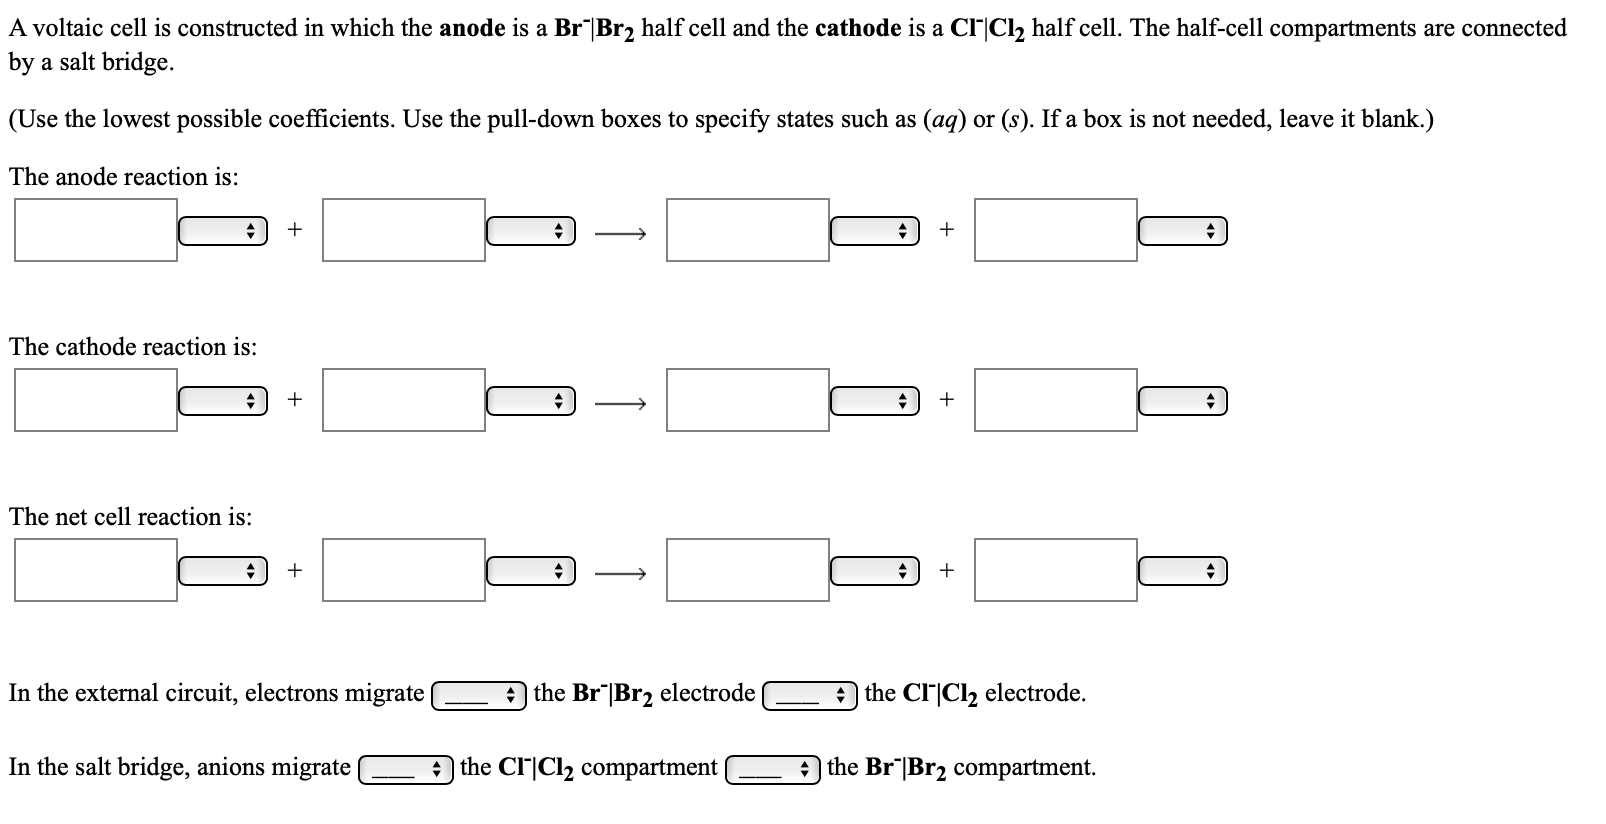 A voltaic cell is constructed in which the anode is a Br Br2 half cell and the cathode is a CI|Cl, half cell. The half-cell compartments are connected
by a salt bridge.
(Use the lowest possible coefficients. Use the pull-down boxes to specify states such as (aq) or (s). If a box is not needed, leave it blank.)
The anode reaction is:
The cathode reaction is:
The net cell reaction is:
In the external circuit, electrons migrate
A the Br"|Br2 electrode
A the Cl|Cl2 electrode.
In the salt bridge, anions migrate
the CI|Cl2 compartment
the Br"|Br2 compartment.
